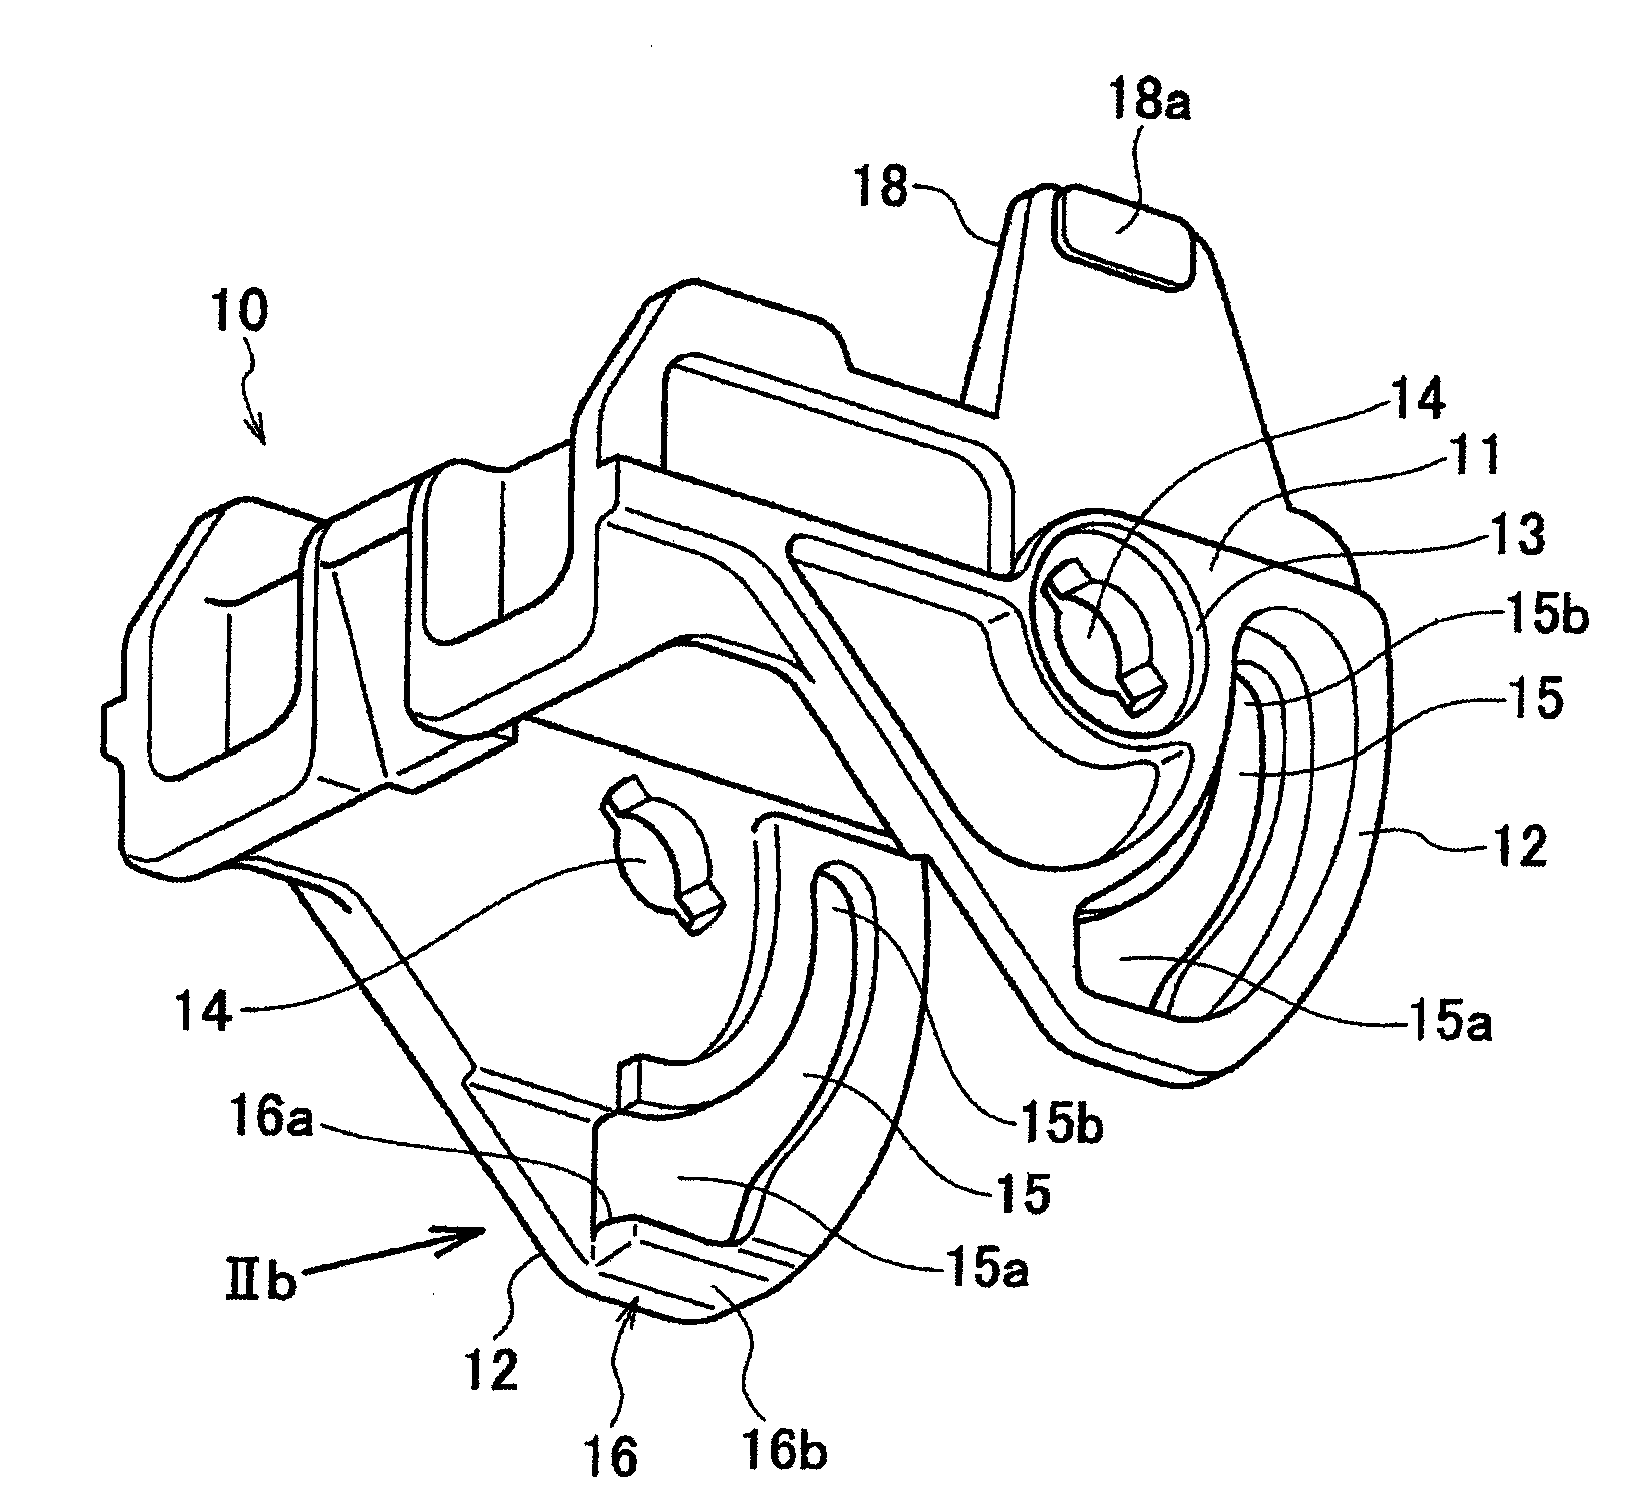 Lever-type connector